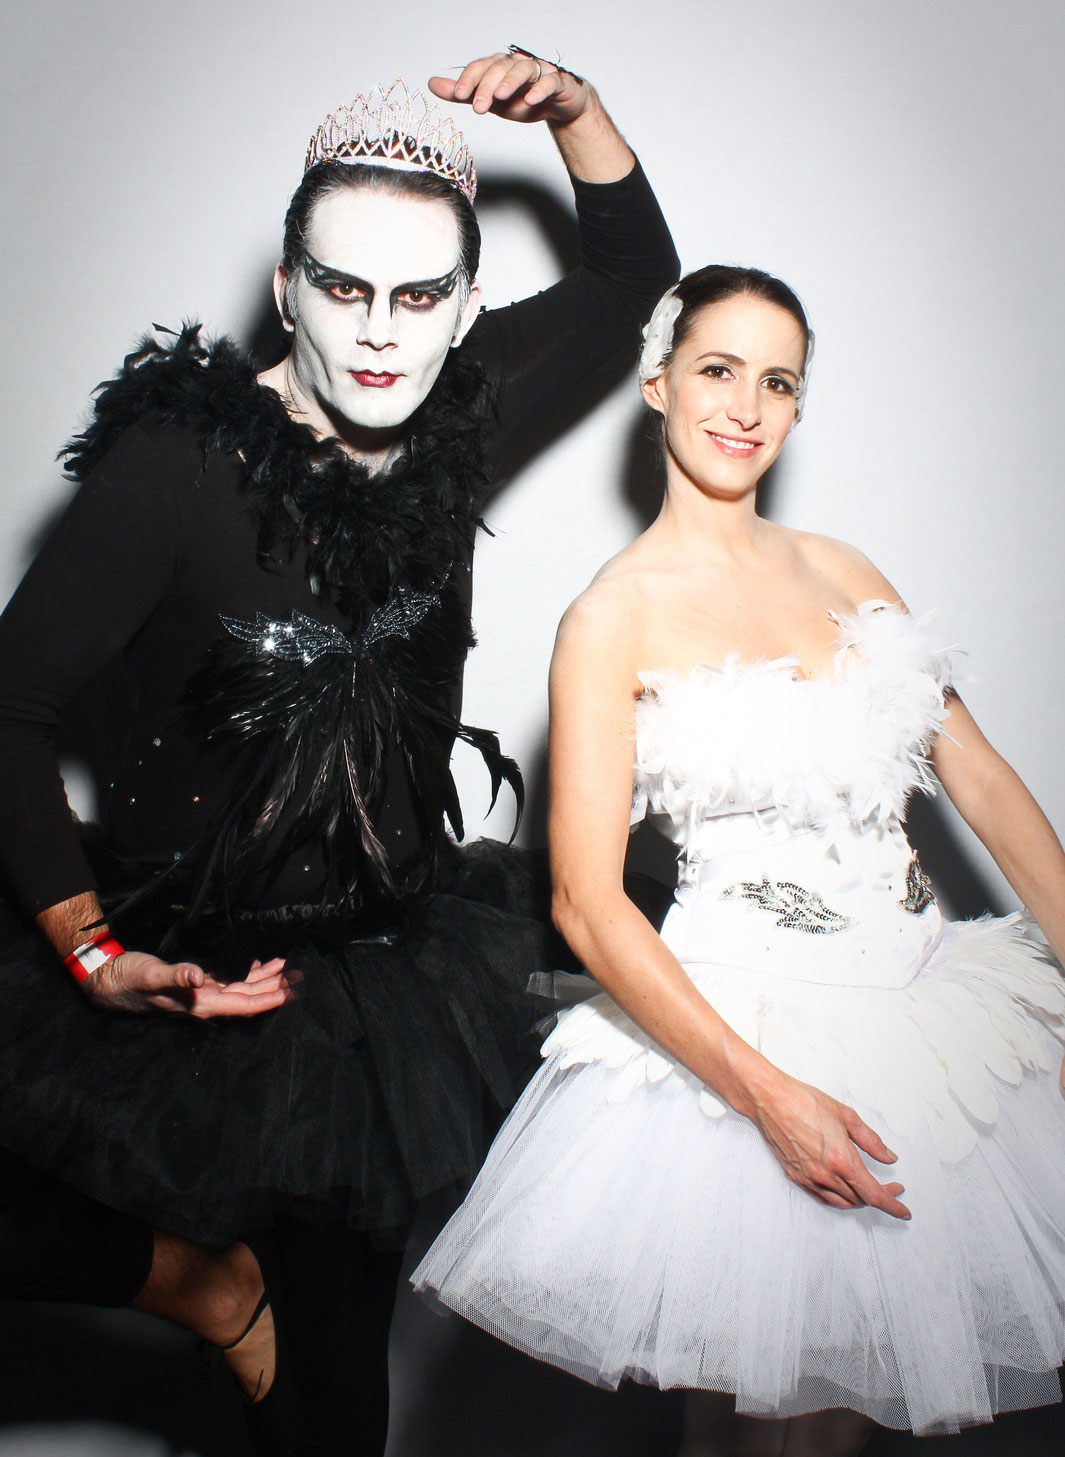 Black and white swan costumes